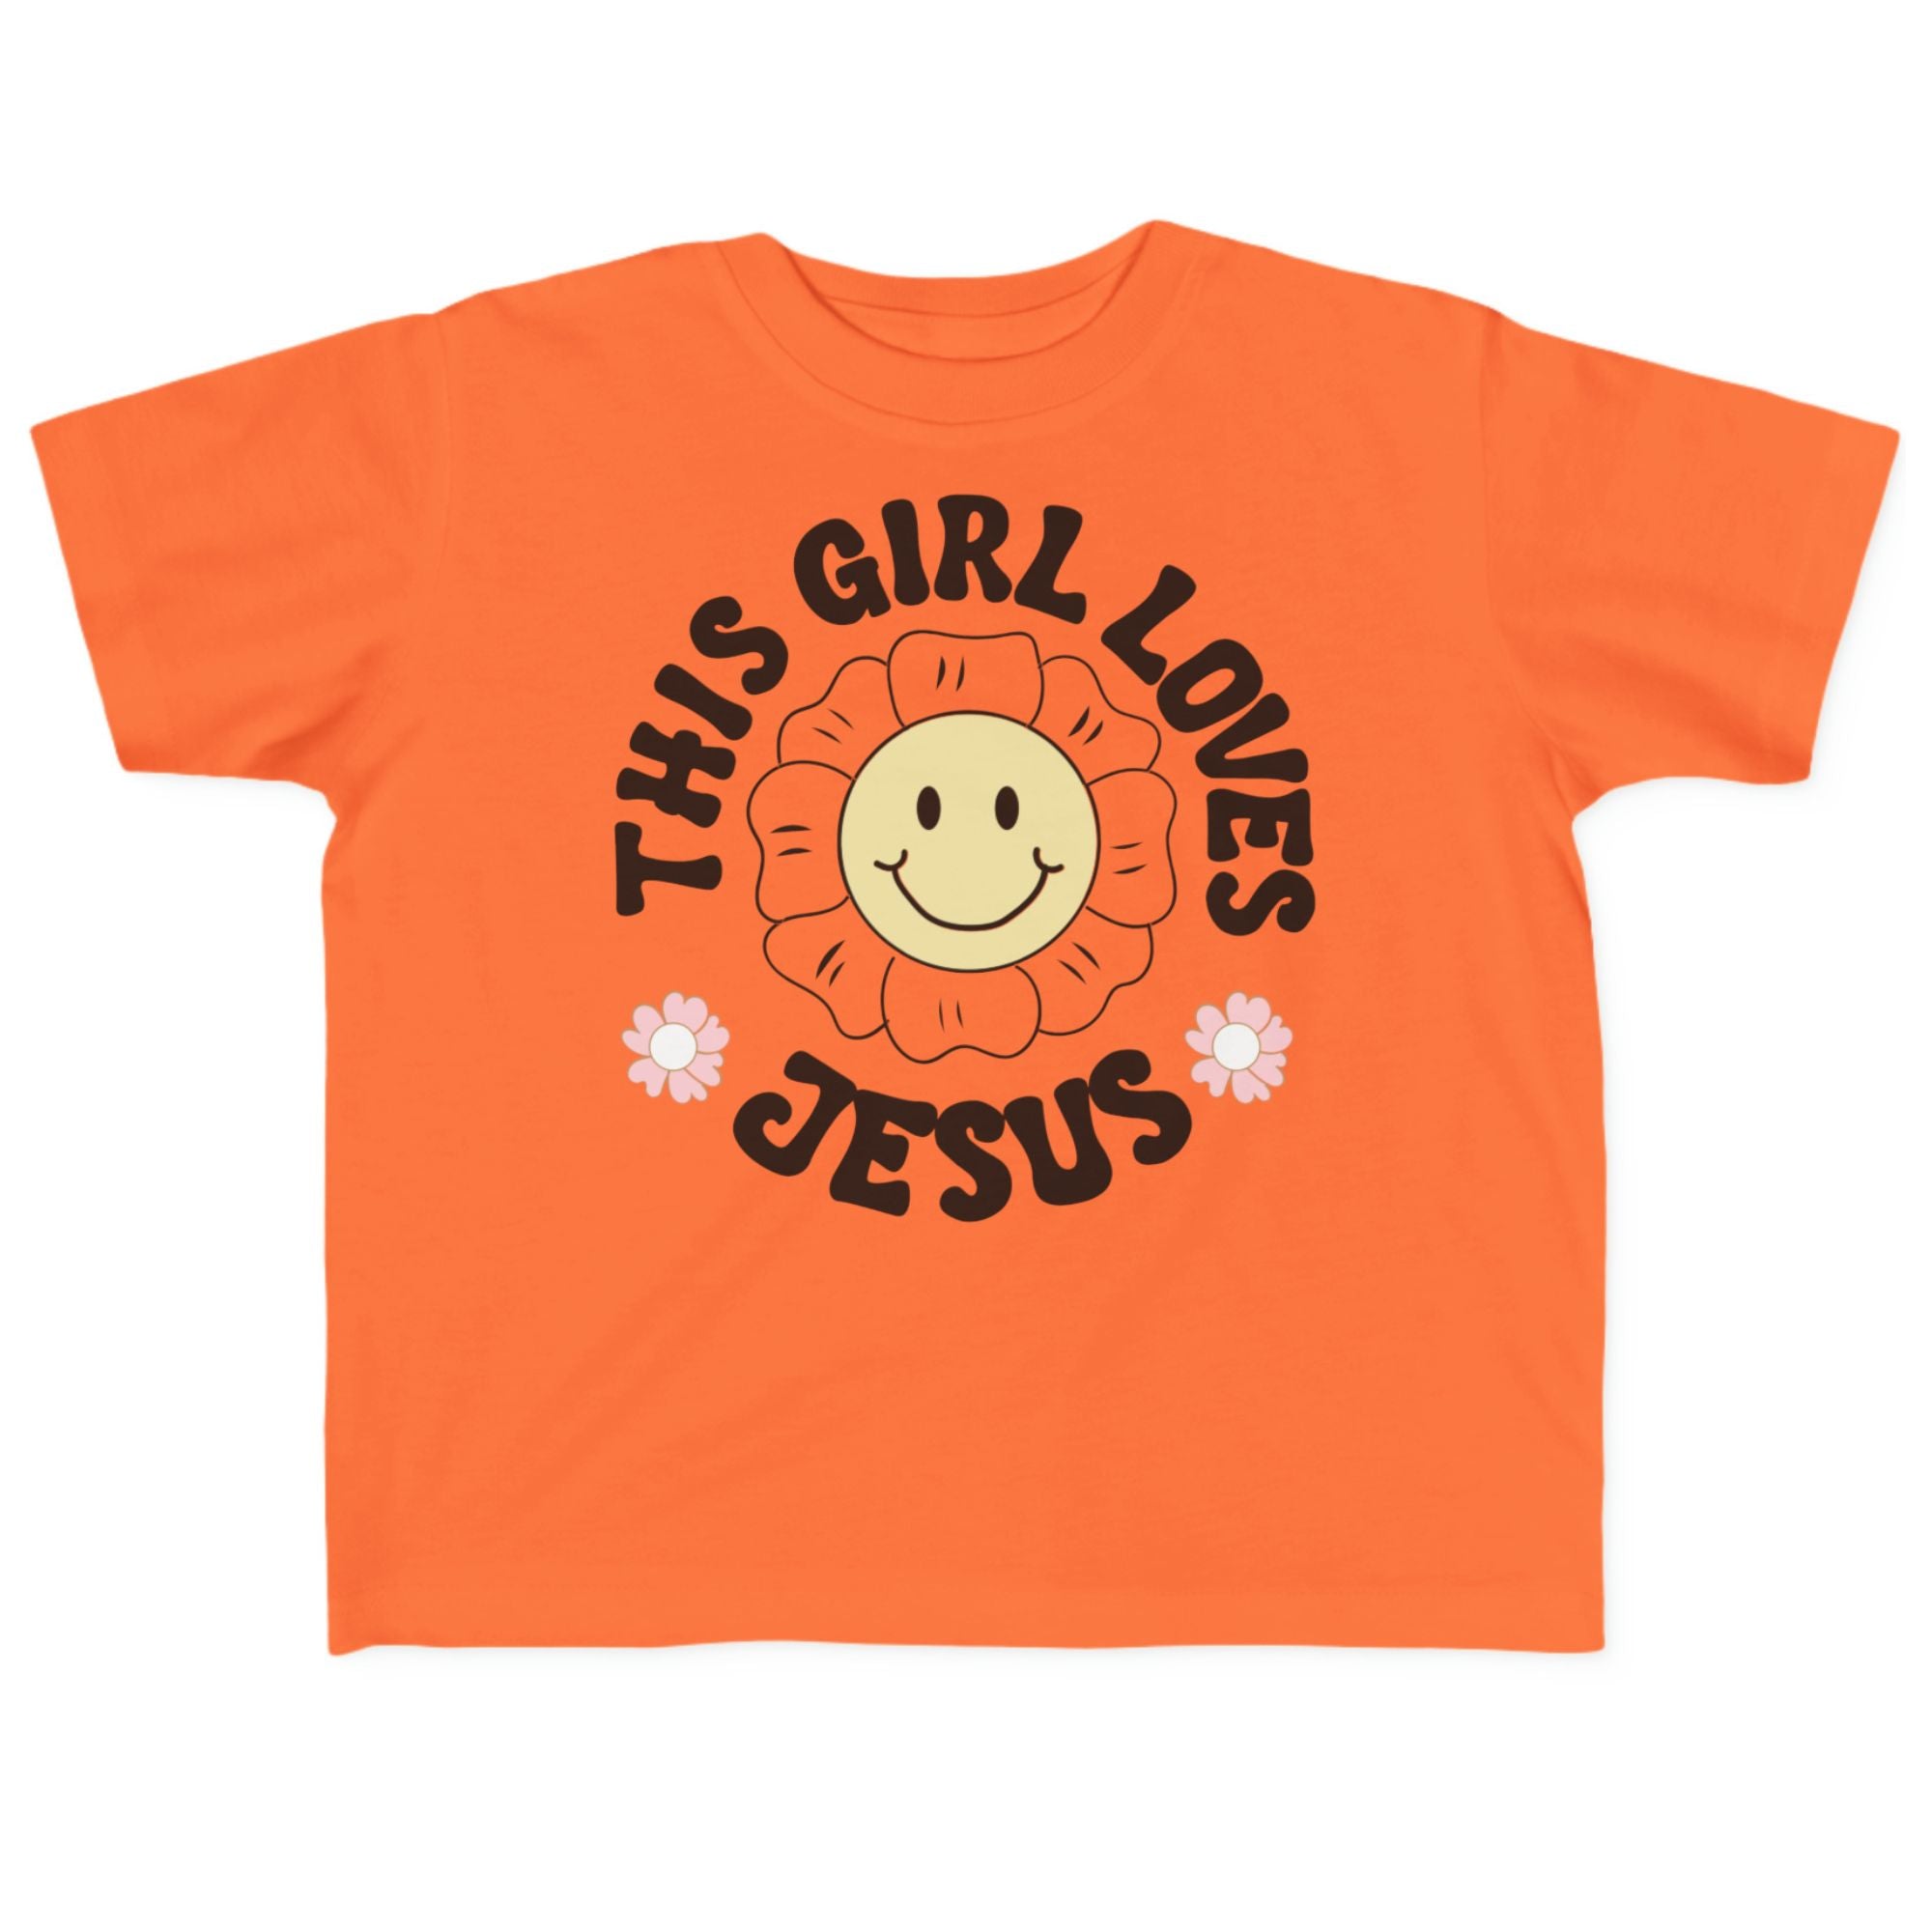 This Girl Loves Jesus Toddler's Fine Jersey Tee Color: Orange Size: 2T Jesus Passion Apparel